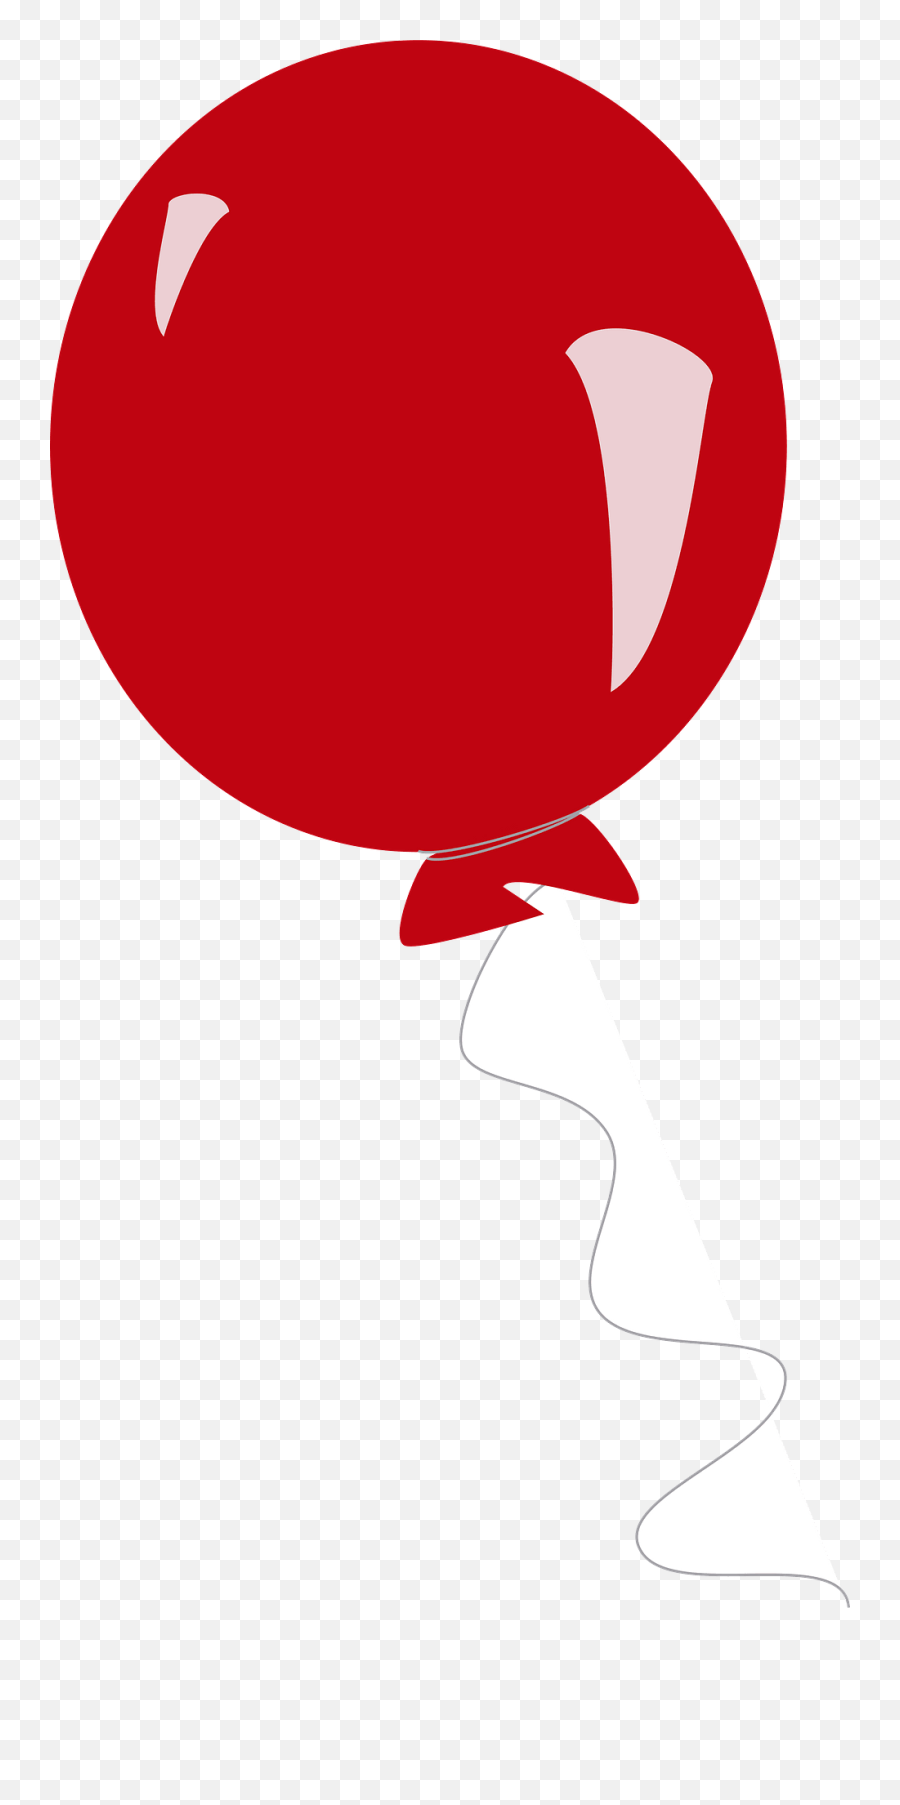 Red Balloon Clipart Free Images 2 - Clipartix Emoji,Balloon Clipart